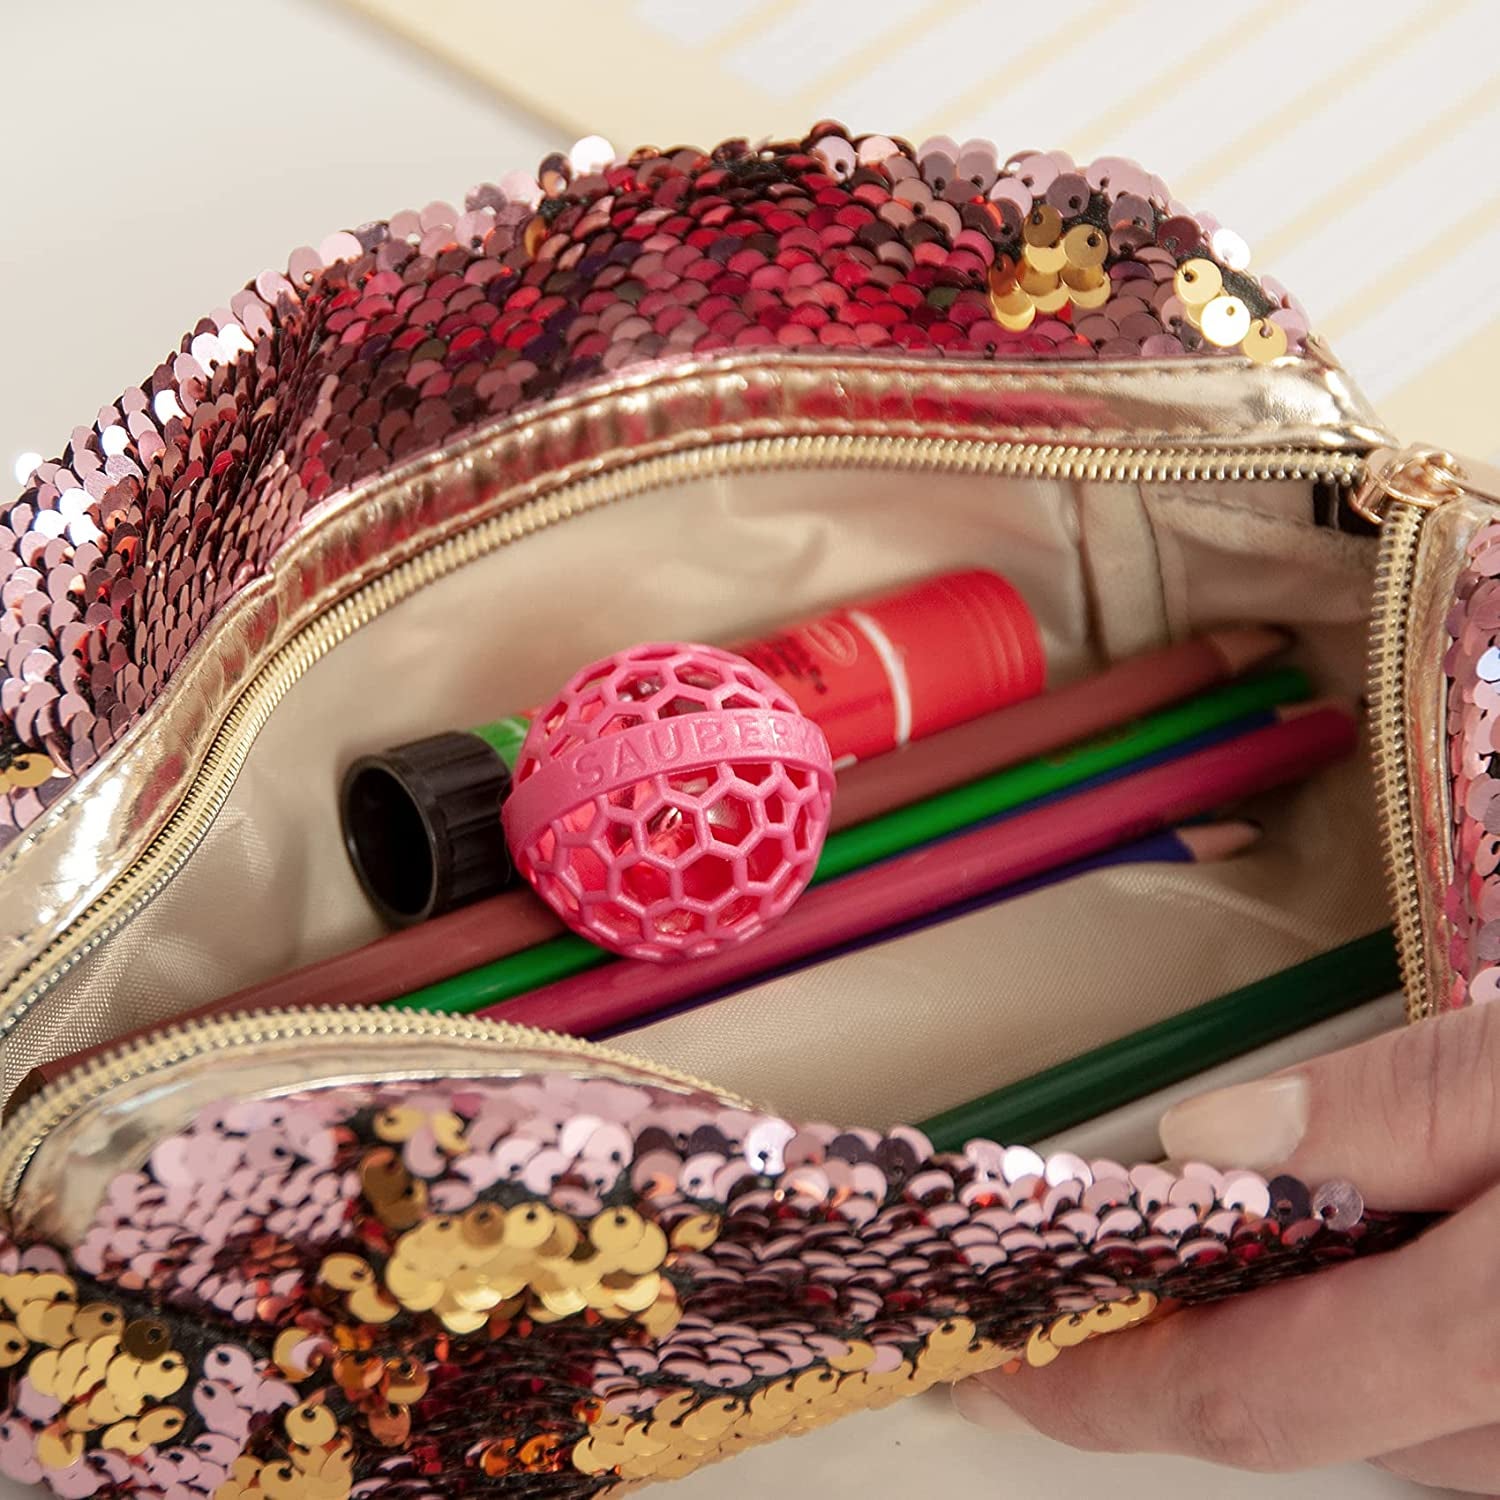 What's in your bag?? #essentials